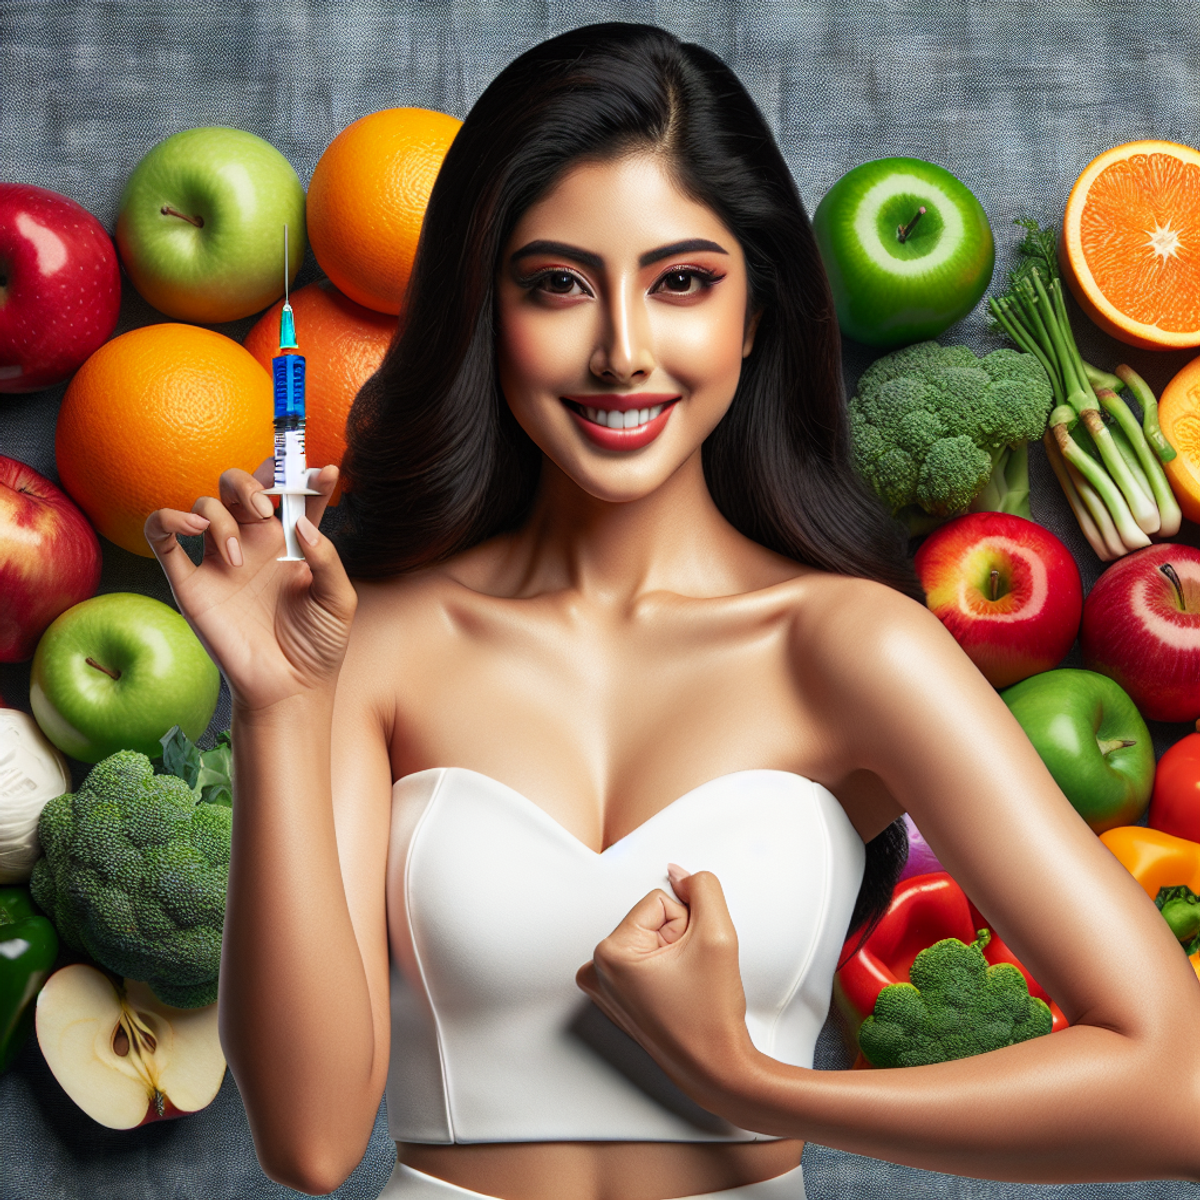 A young South Asian woman confidently holding a syringe with an assortment of fresh fruits and vegetables in the backdrop.